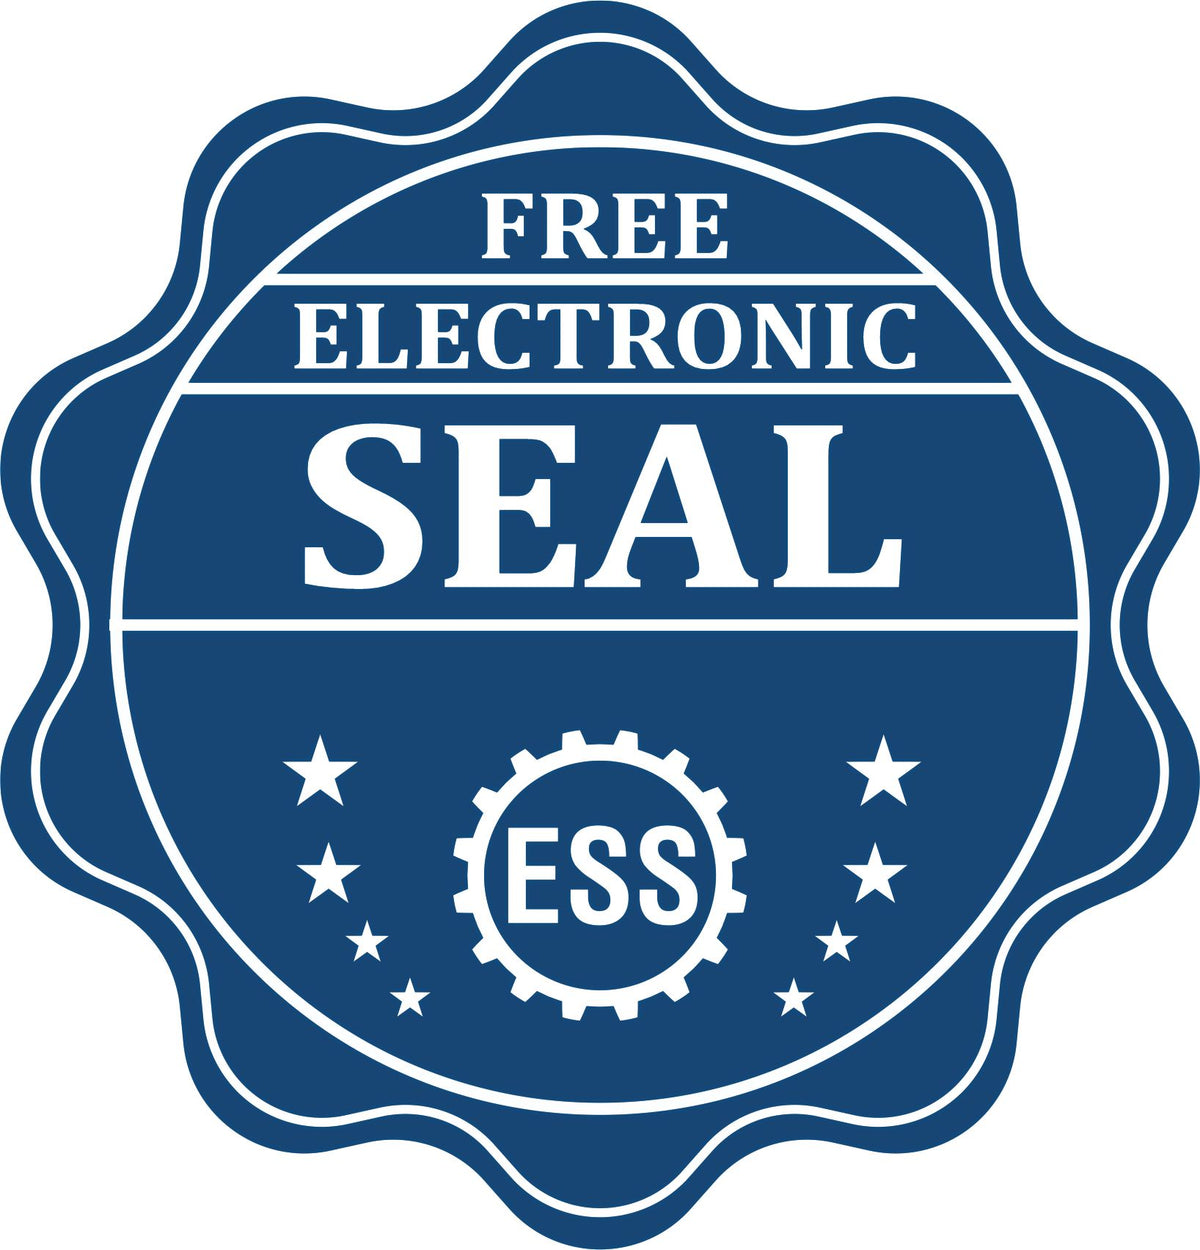 A badge showing a free electronic seal for the Heavy Duty Cast Iron Arizona Geologist Seal Embosser with stars and the ESS gear on the emblem.